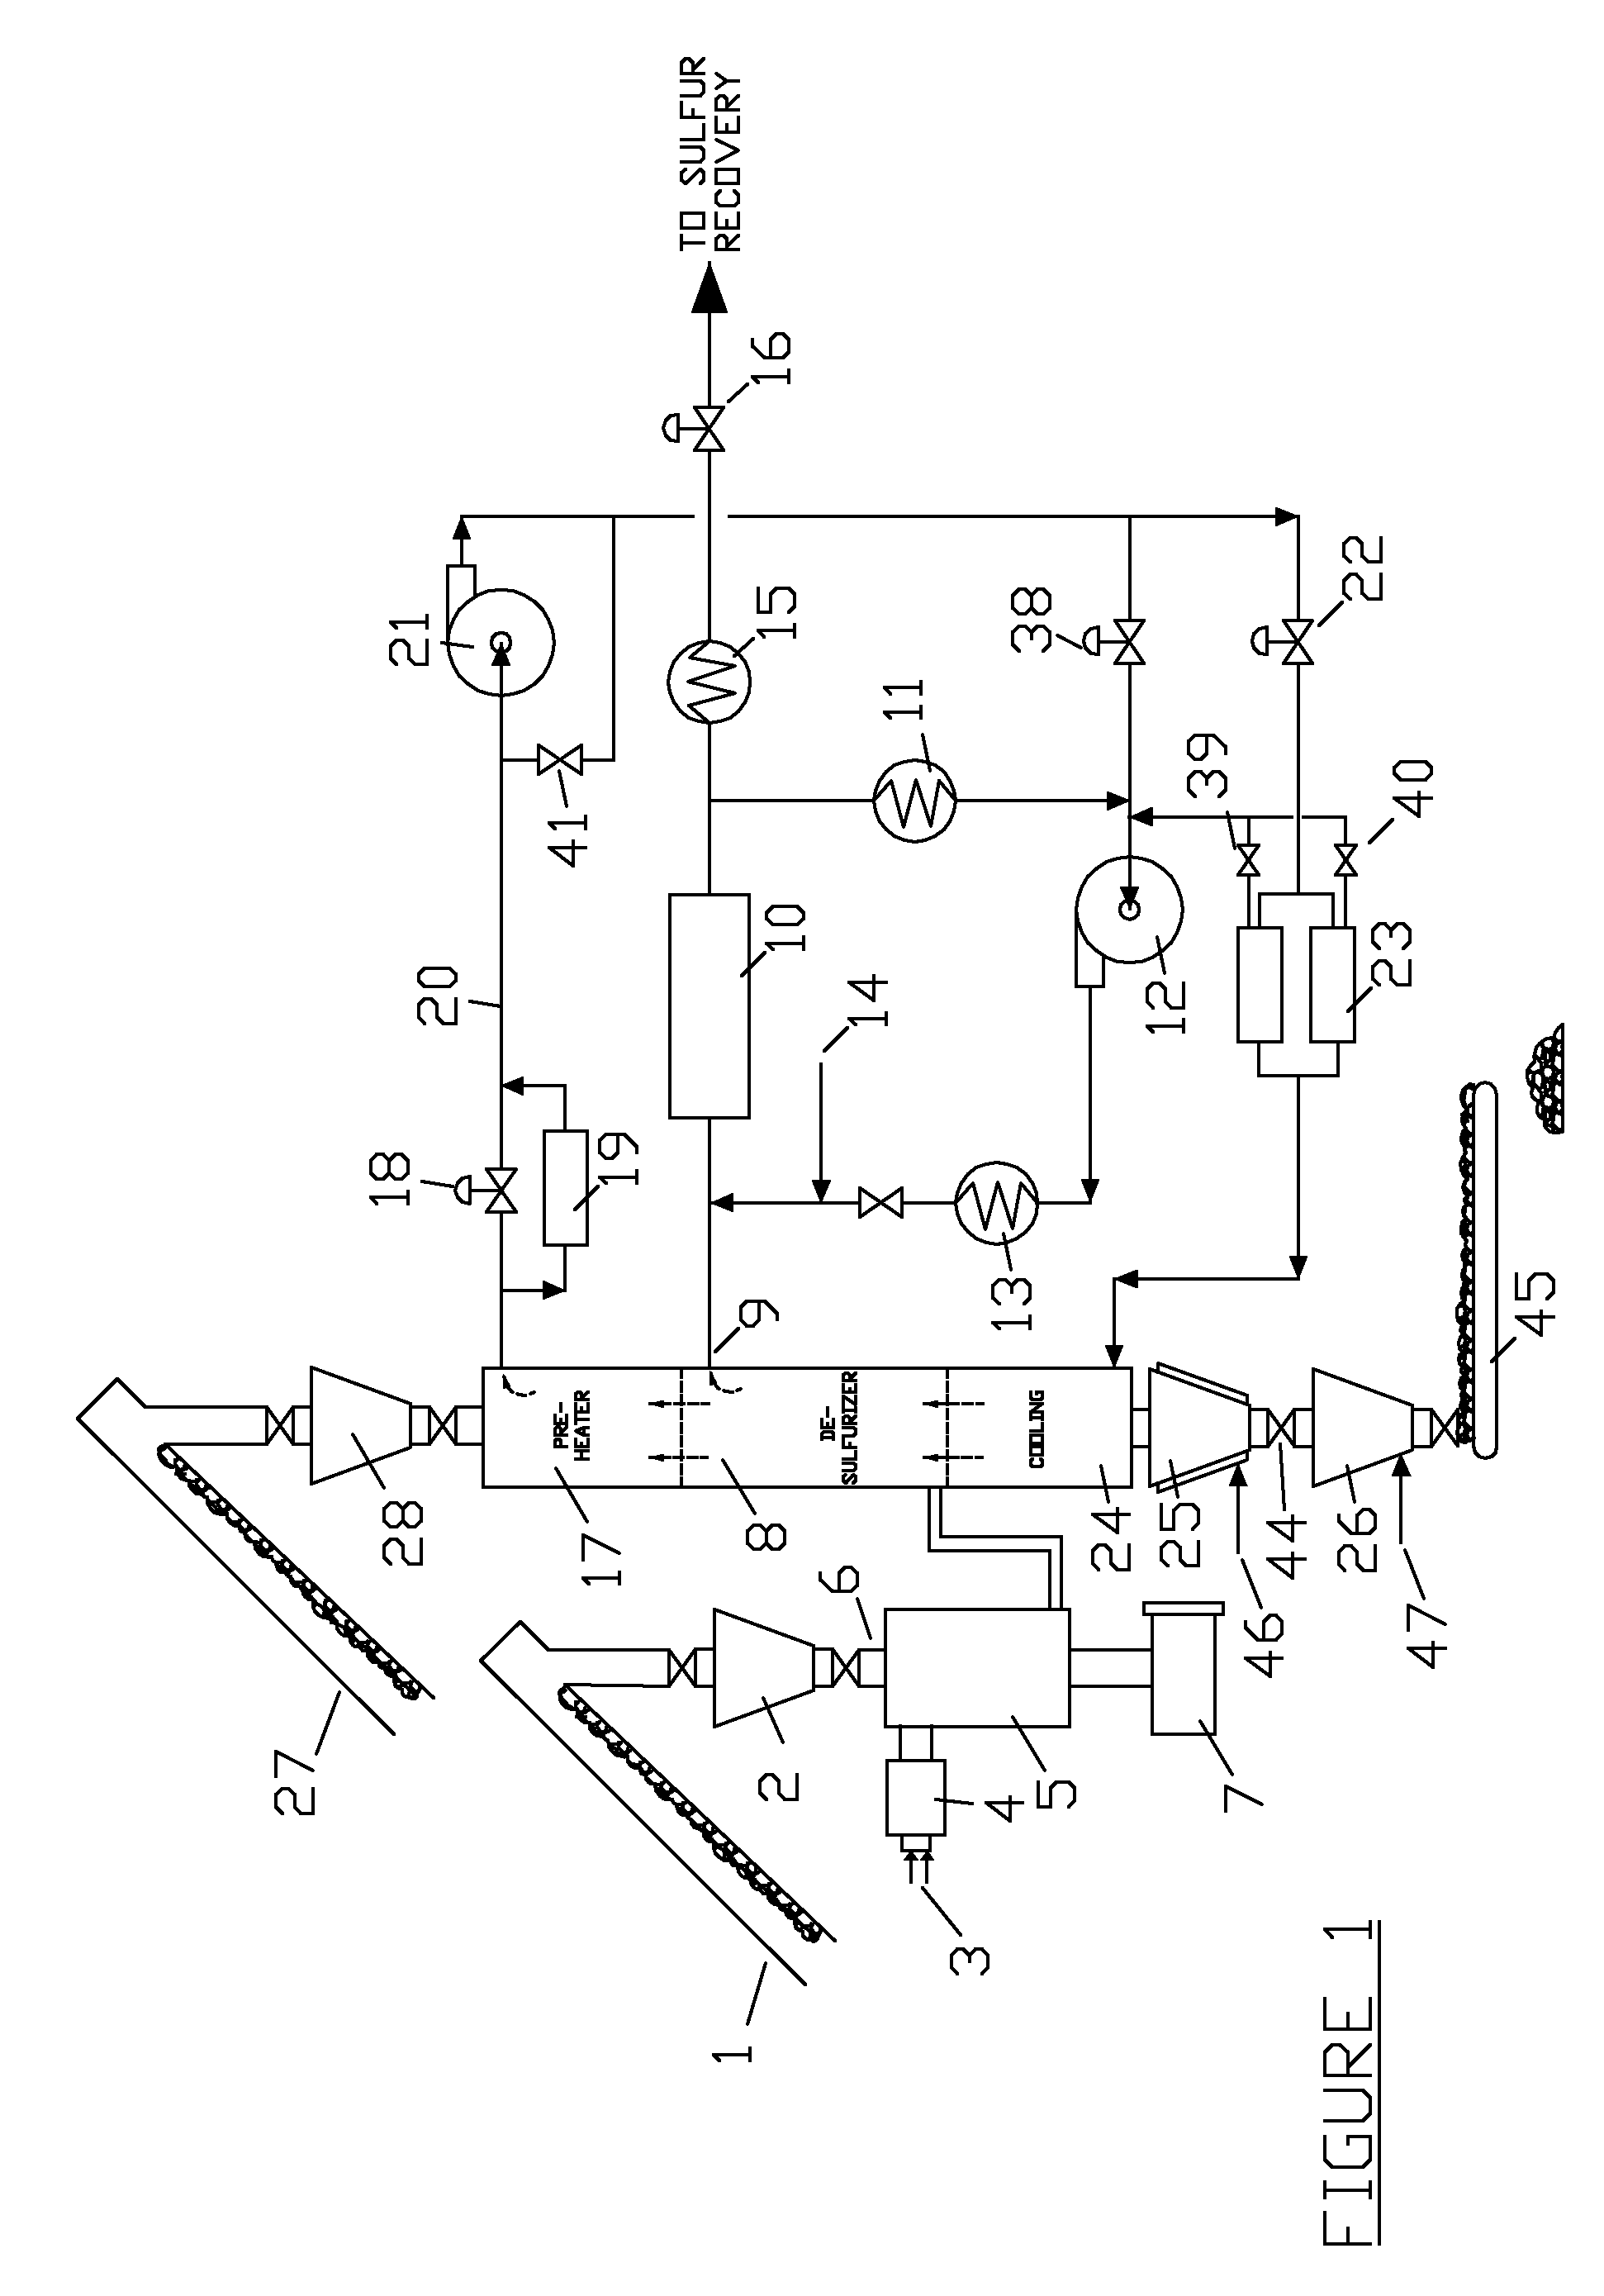 CO Generator and Process for Desulfurizing Solid Carbon-based Fuels